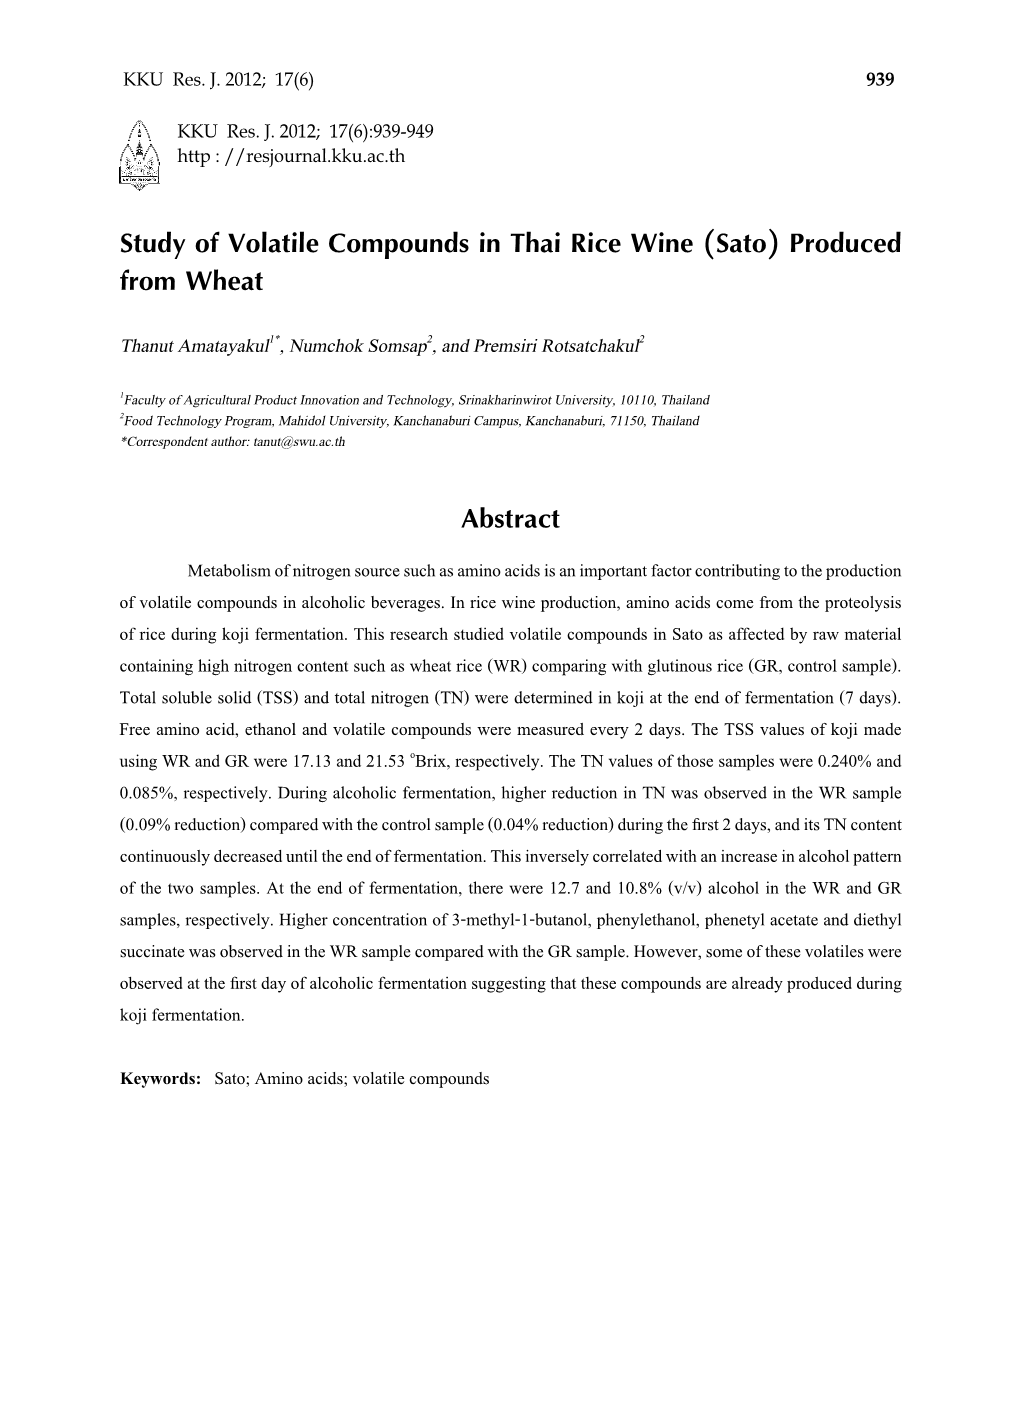 Study of Volatile Compounds in Thai Rice Wine (Sato) Produced from Wheat